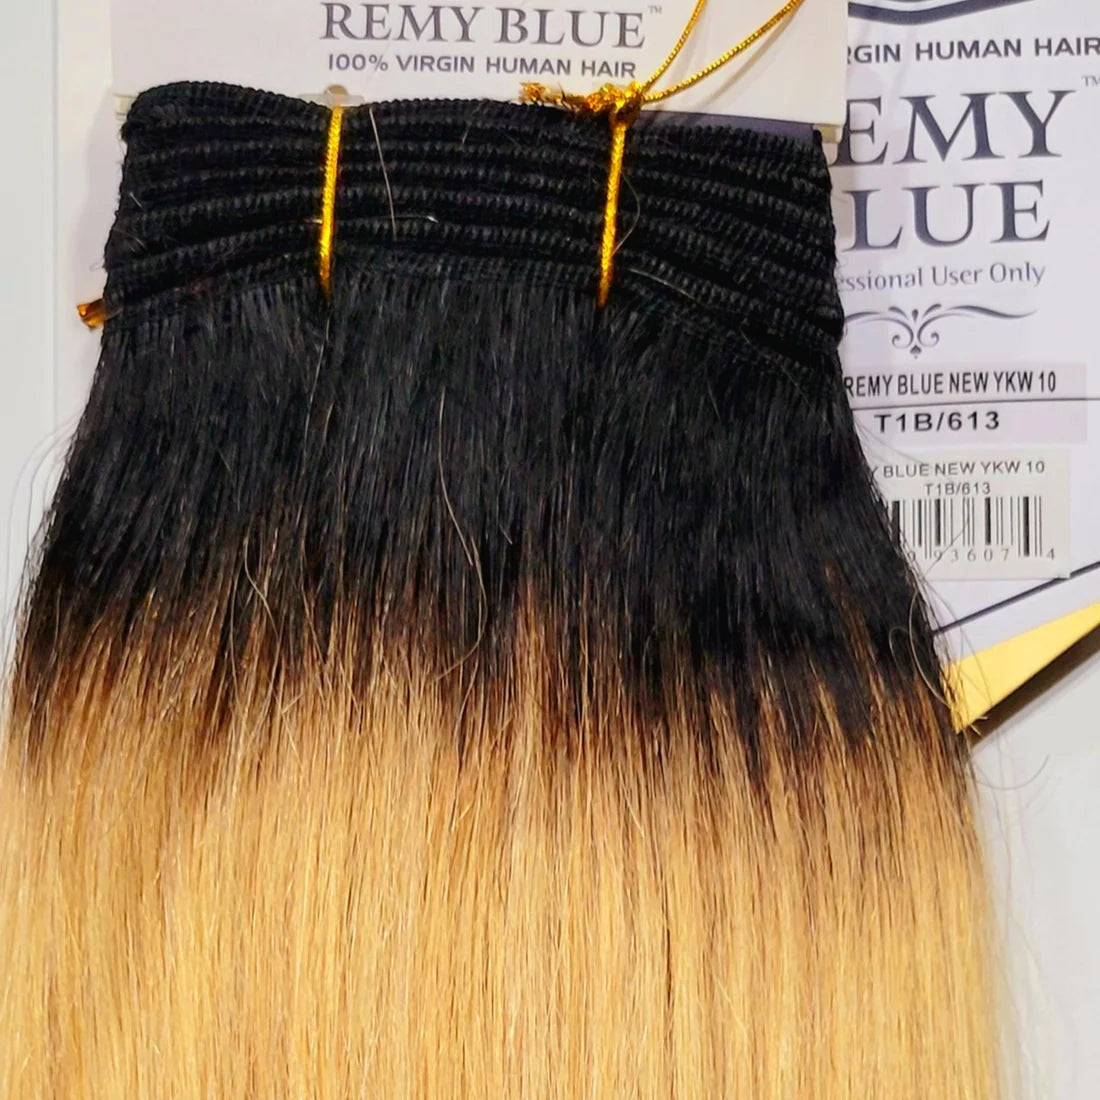 Remy Blue Human Hair New Yaky 10"